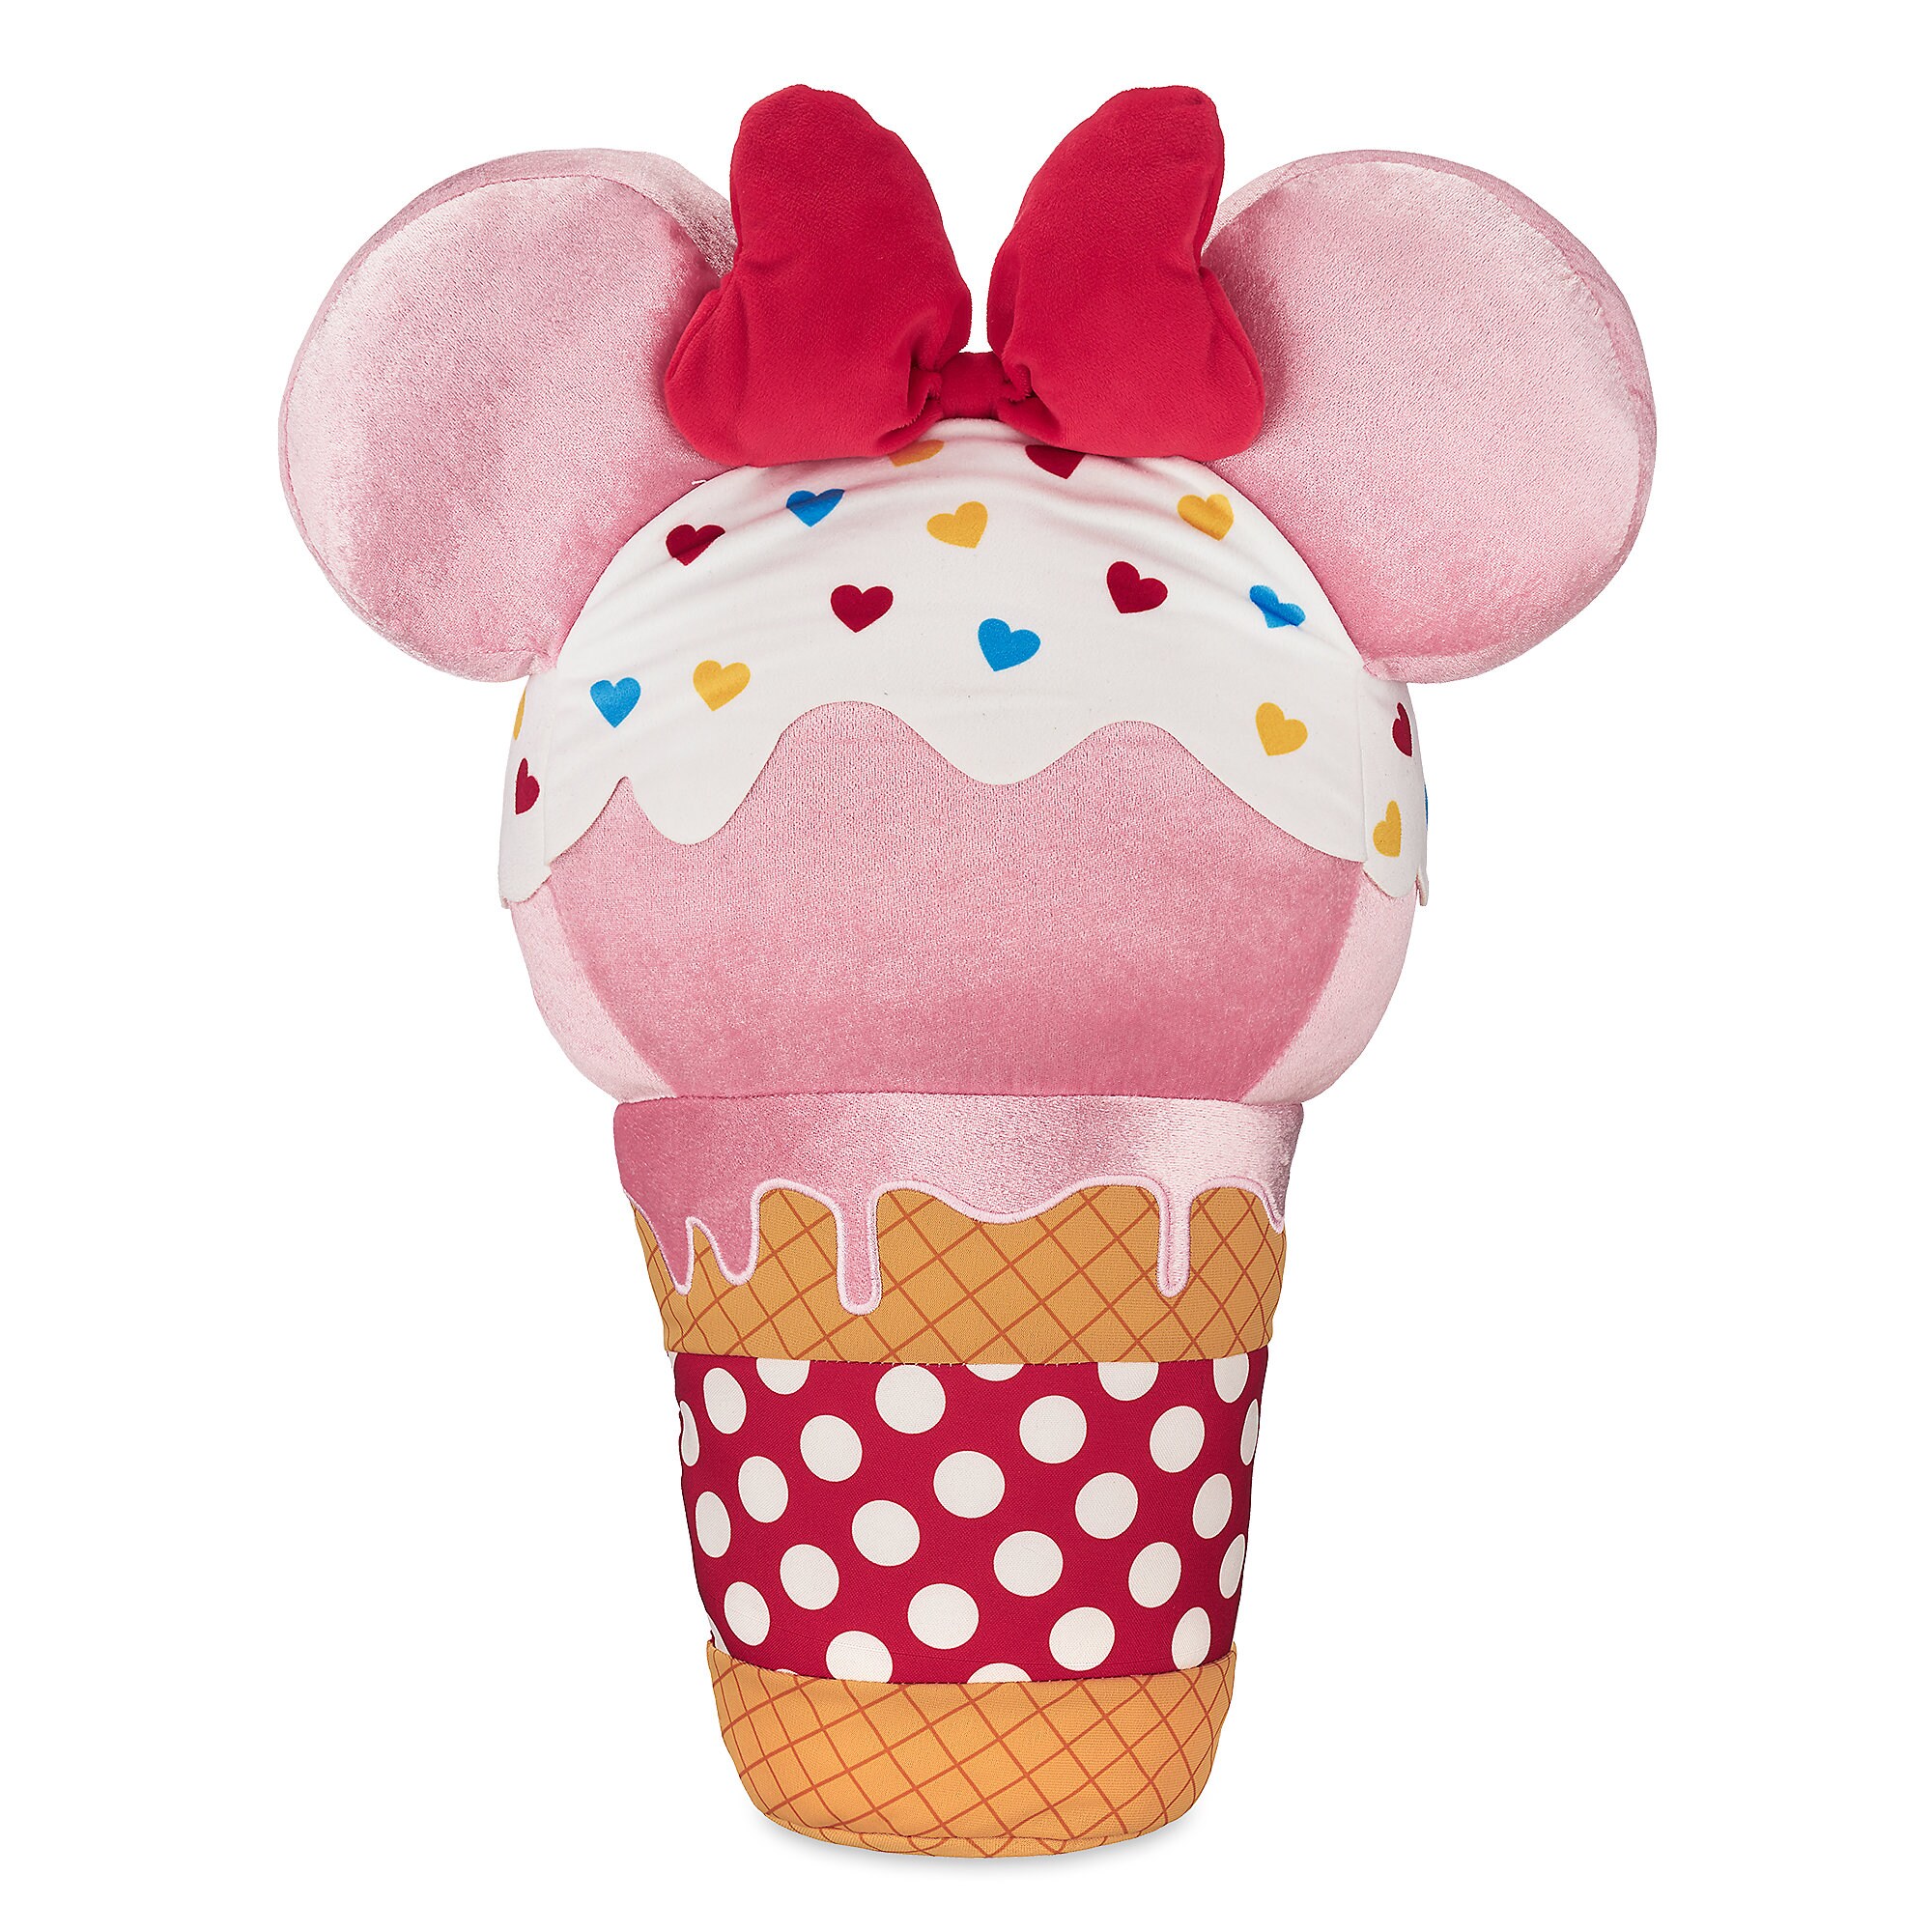 Minnie Mouse Ice Cream Cone Plush - Scented - Large - 20''